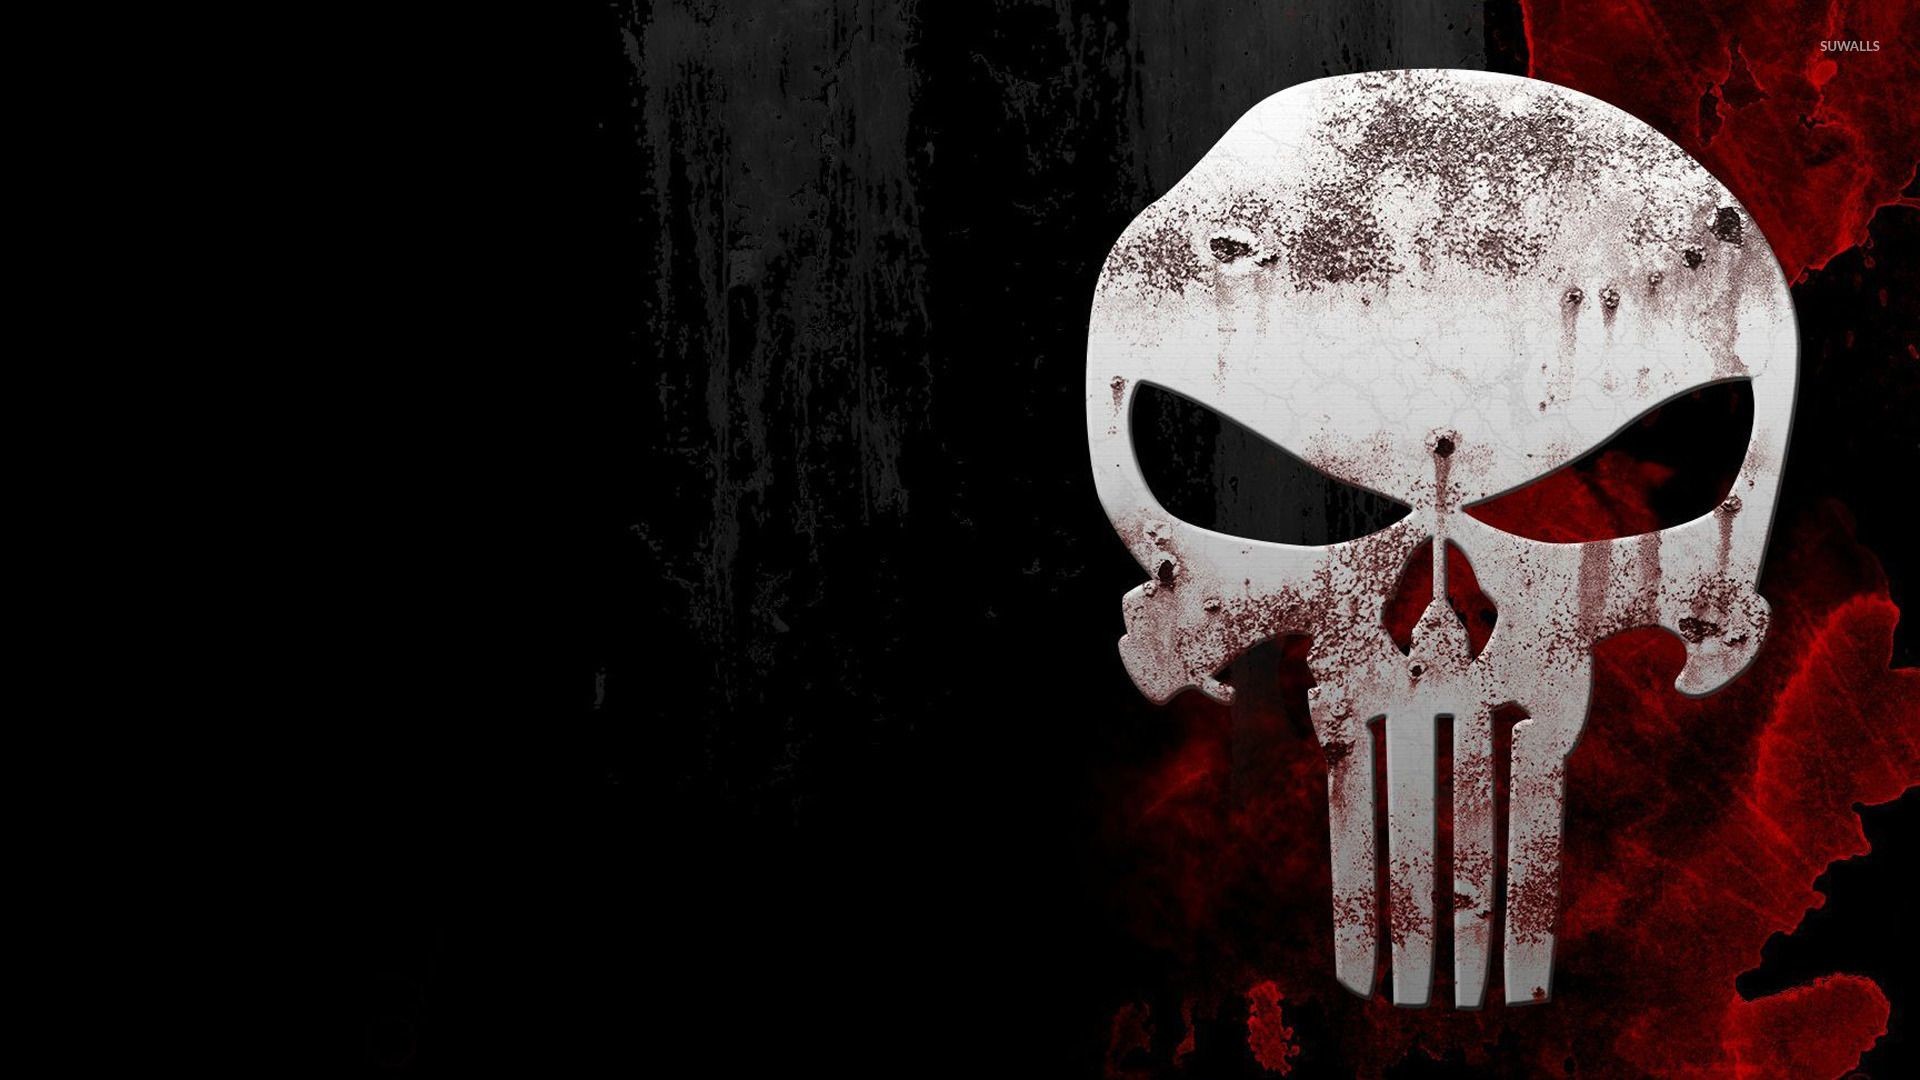 1920x1080 Top Navy Seal Skull On Wallpapers | Military Photos | Pinterest